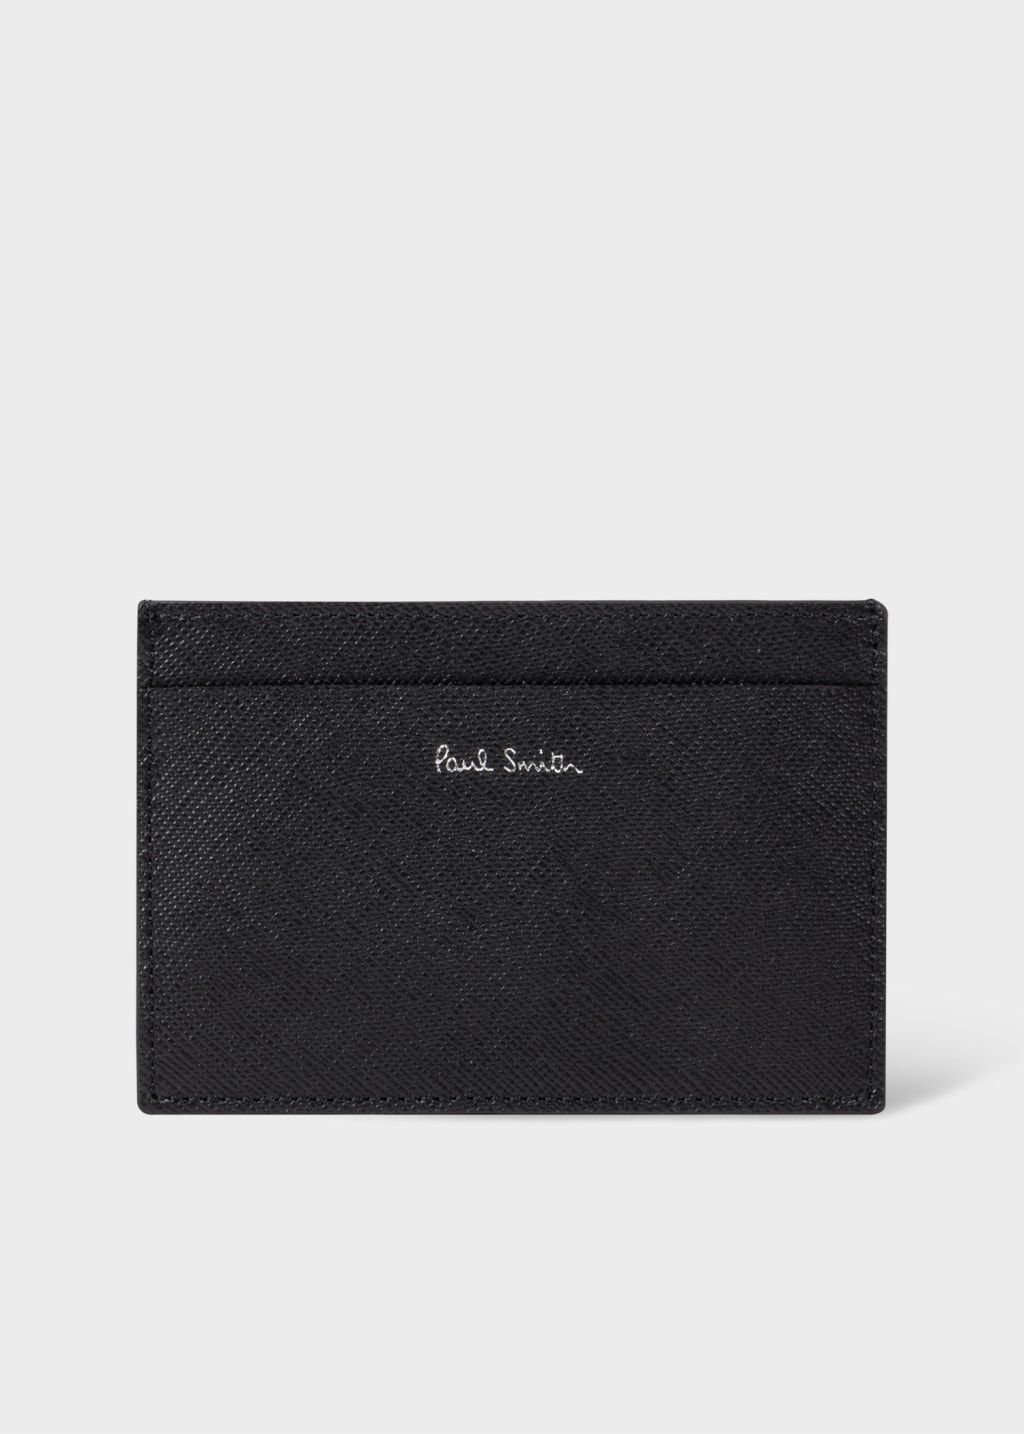 Front View - 'Mini Blur' Print Leather Card Holder Paul Smith